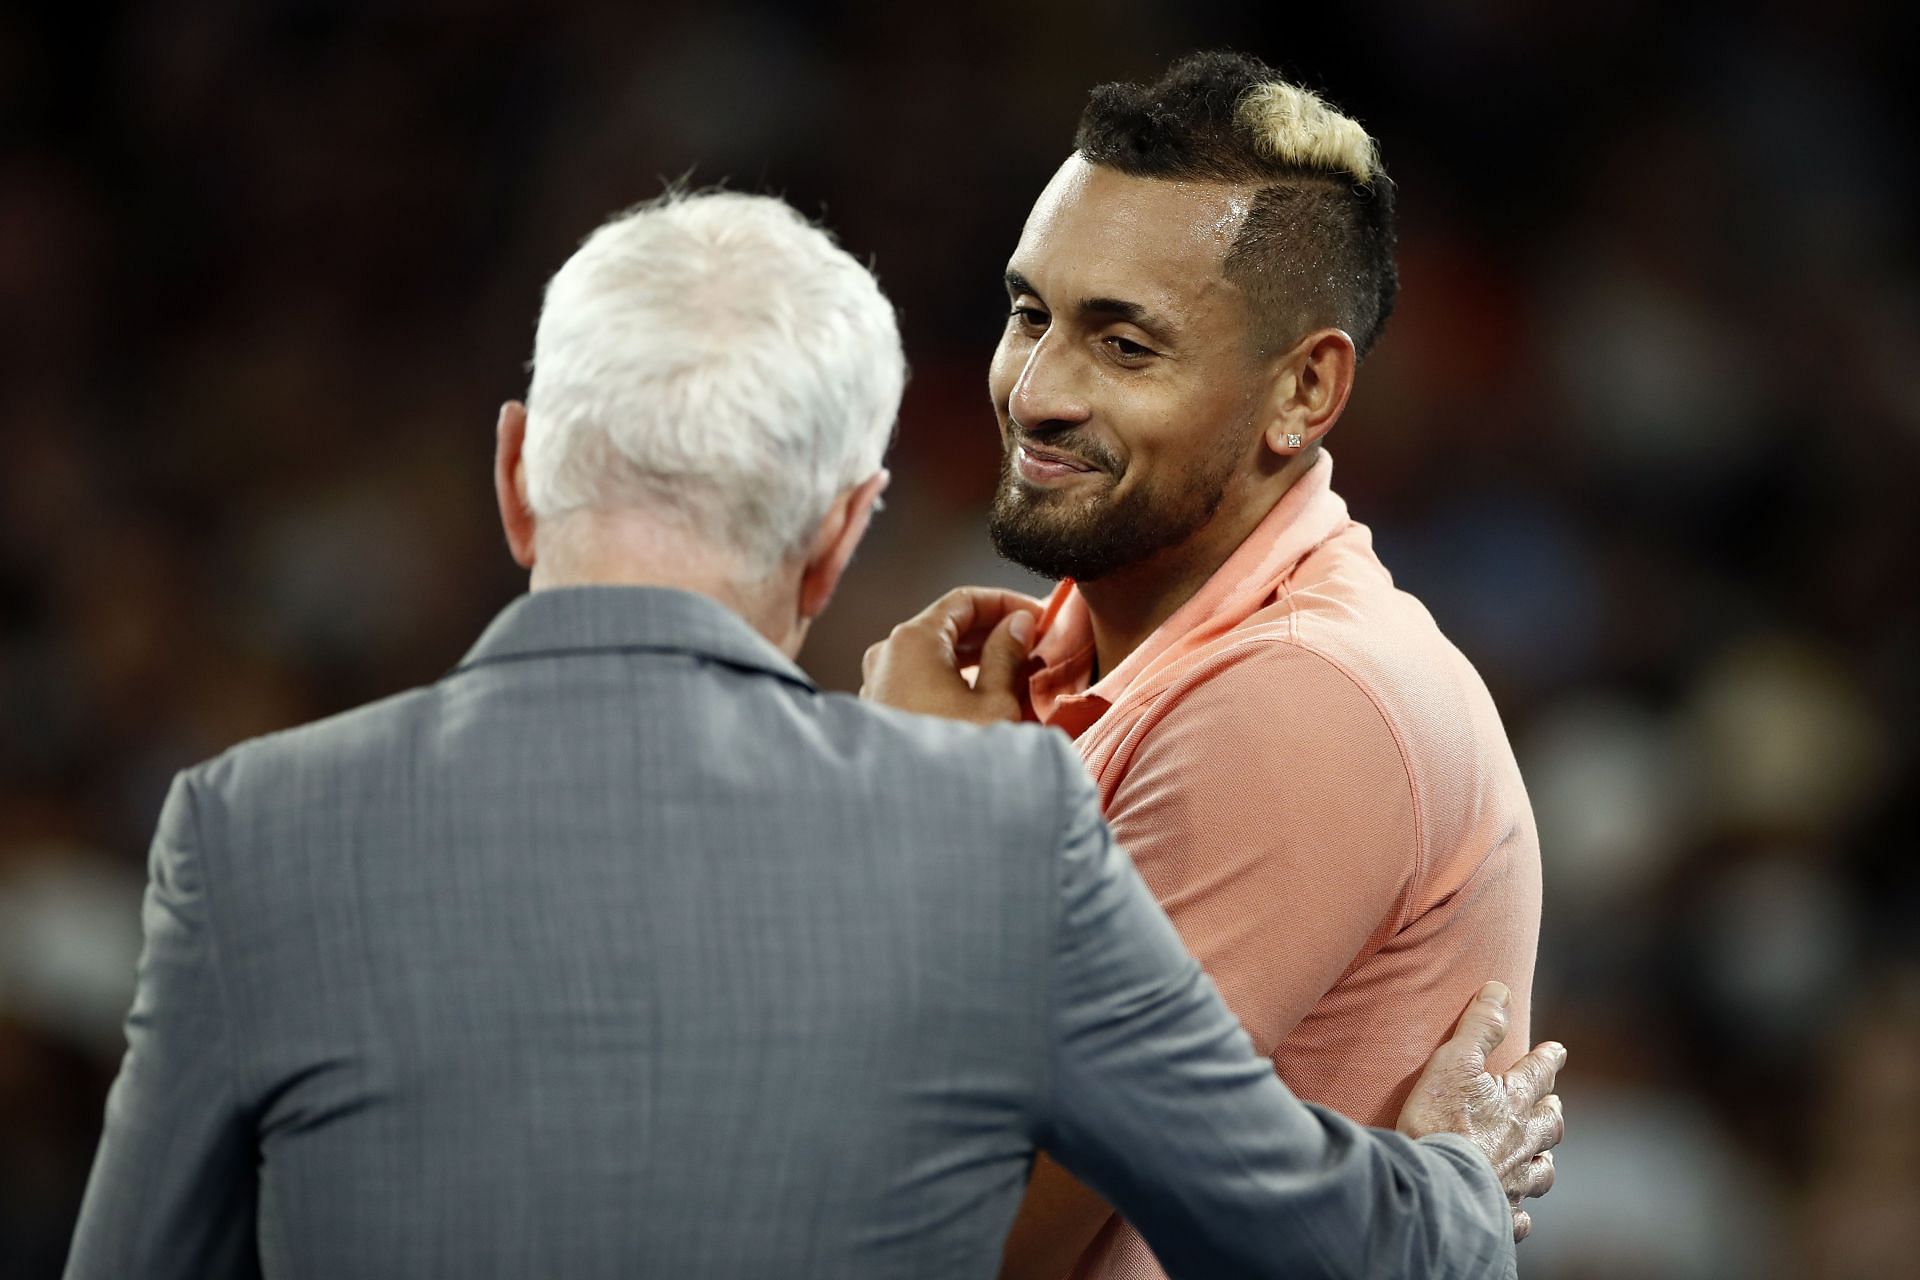 John McEnroe and Nick Kyrgios pictured at the2020 Australian Open